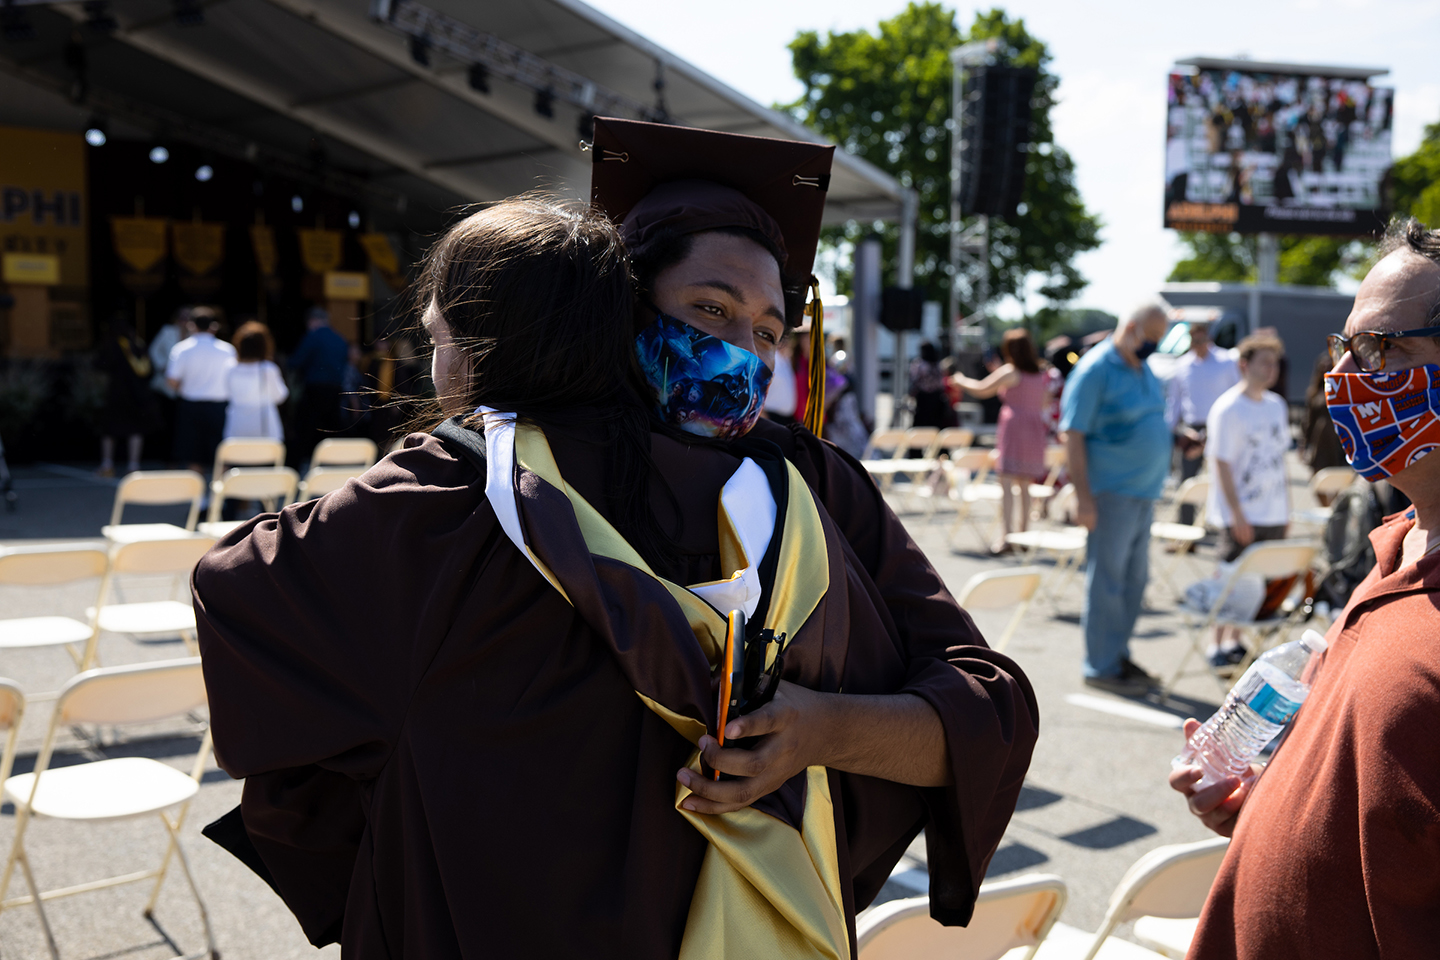 Two graduating students embrace while wearing masks.